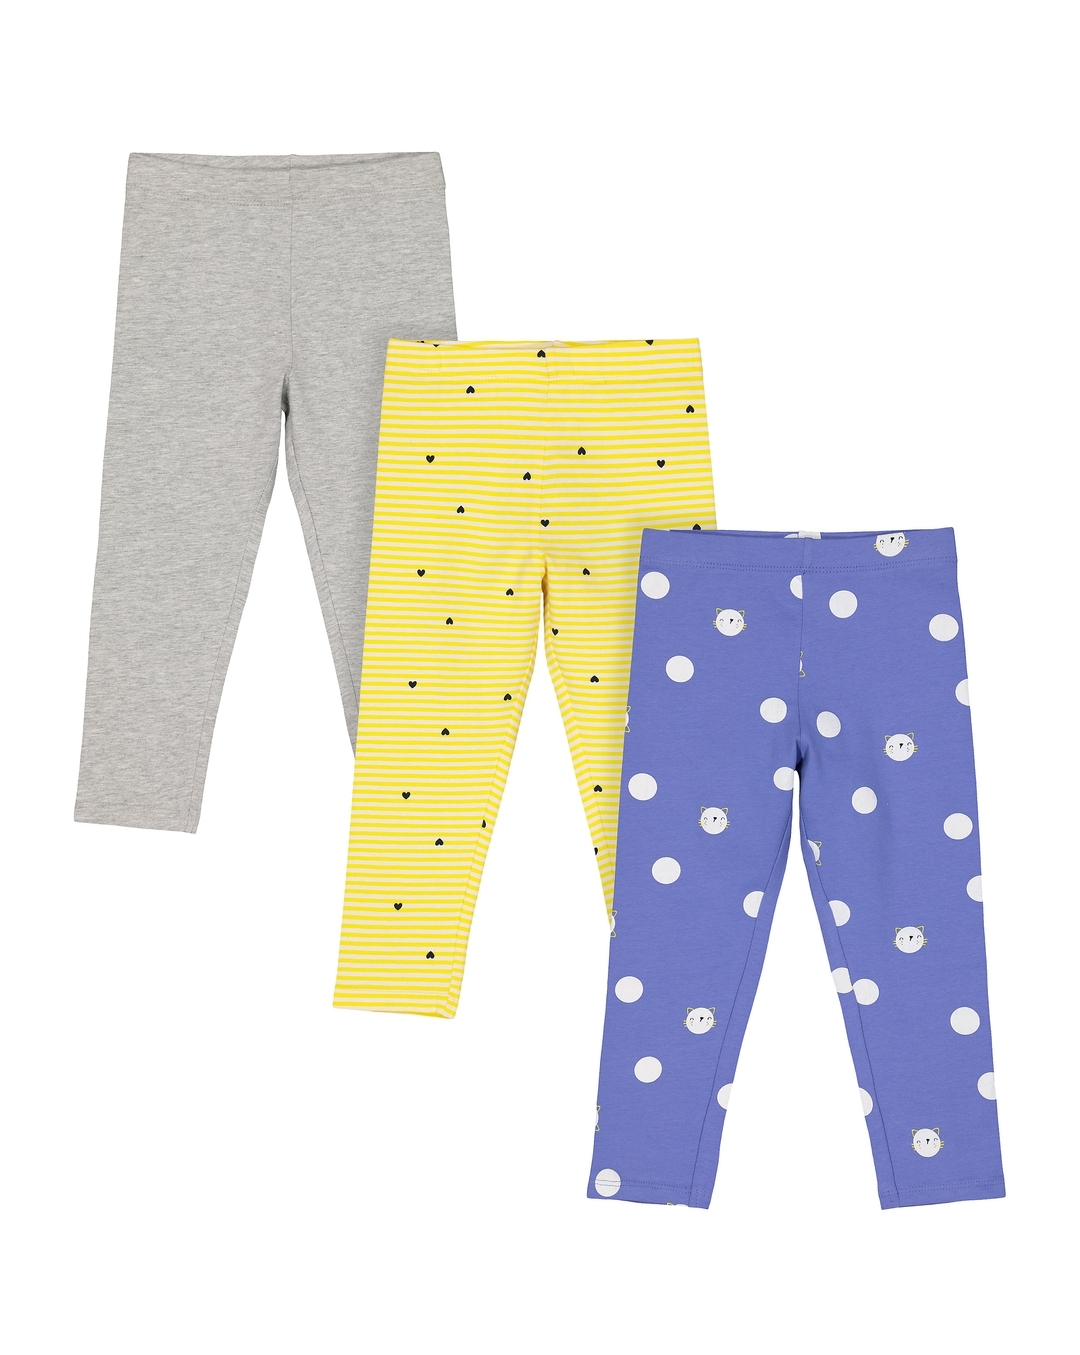 Buy Girls Leggings -Pack of 3-Multicolor Online at Best Price | Mothercare